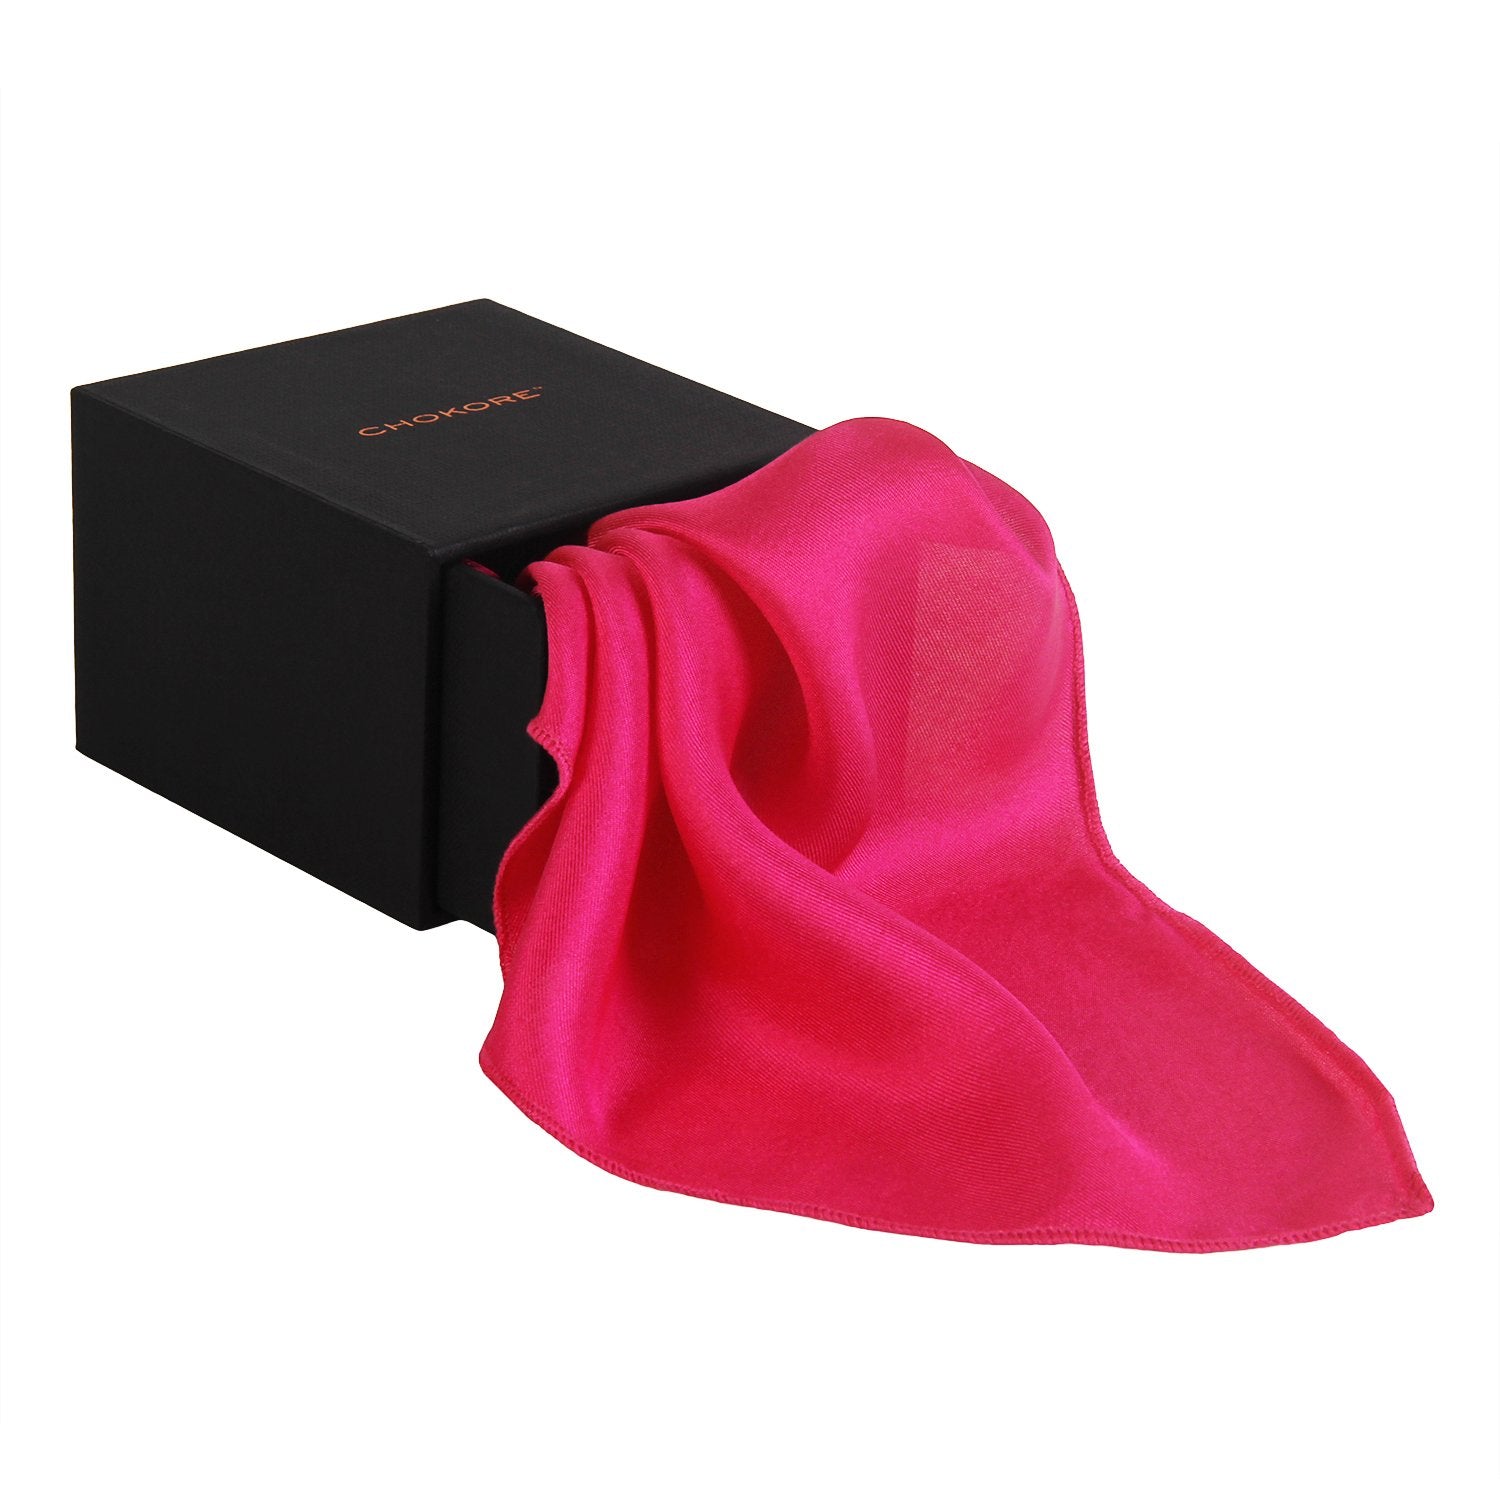 Chokore Paradise Pink Pure Silk Pocket Square, from the Solids Line